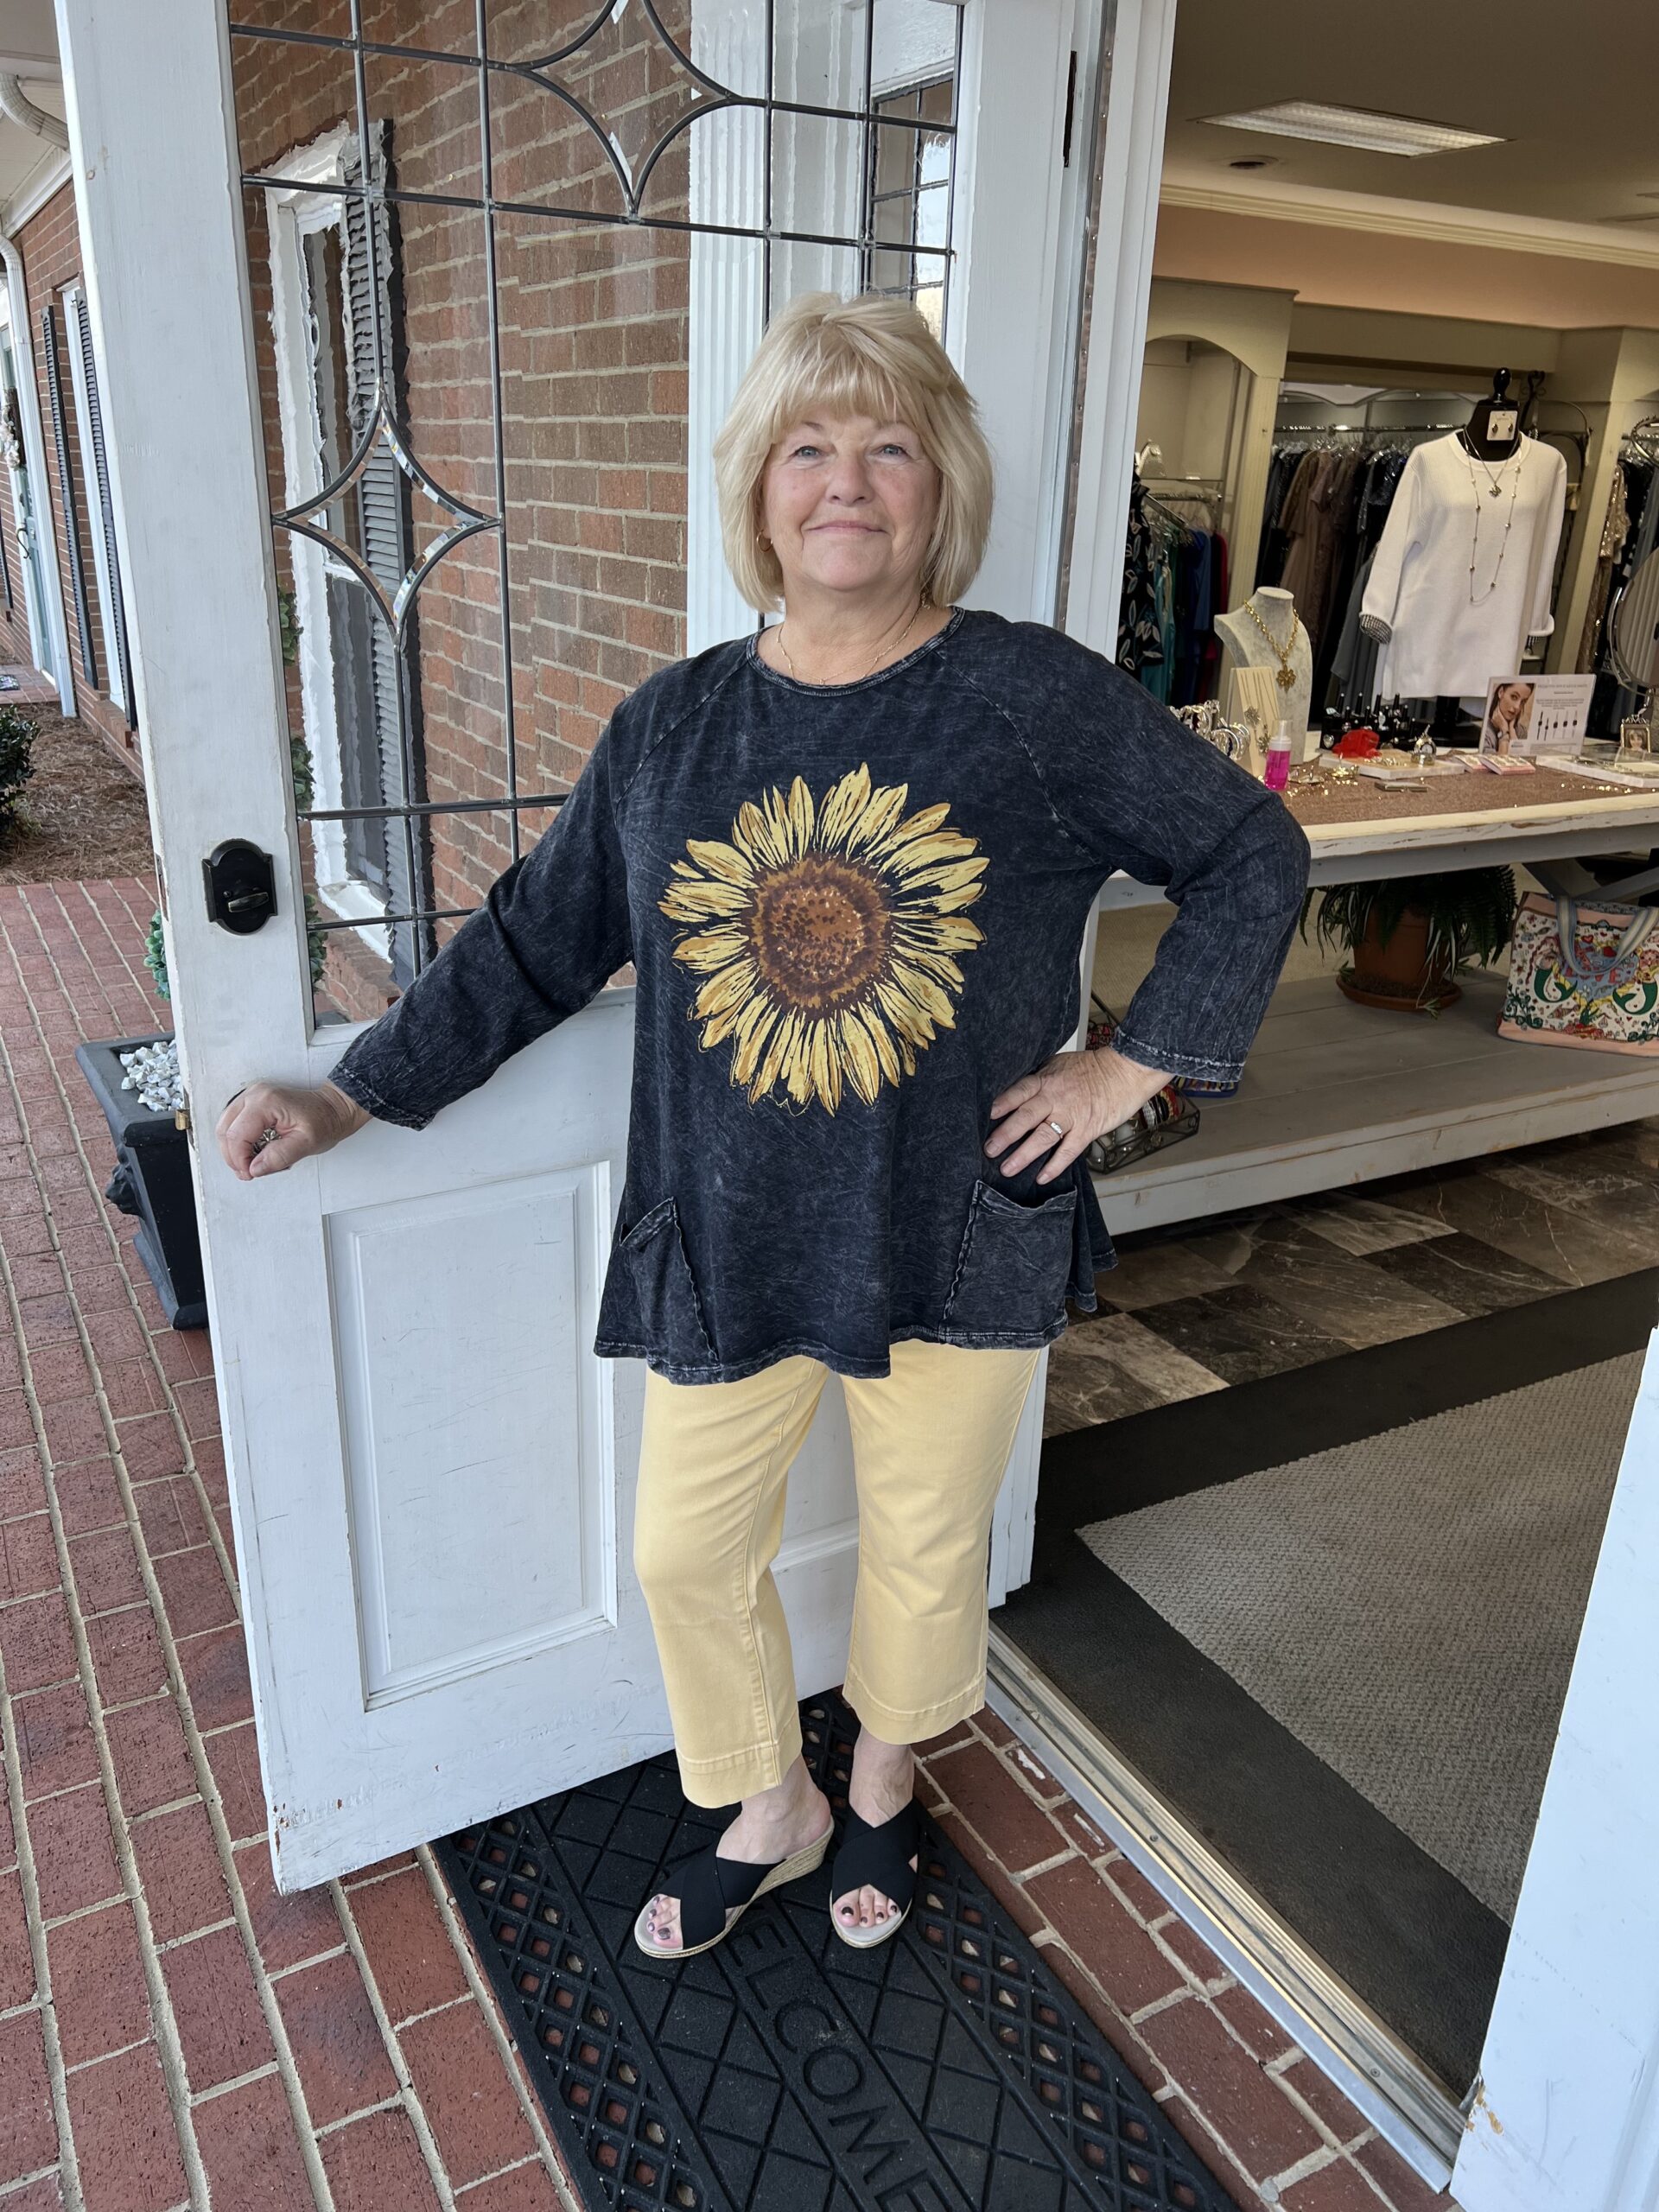 Fashion over 50: Long Cardigan and Boots - Southern Hospitality